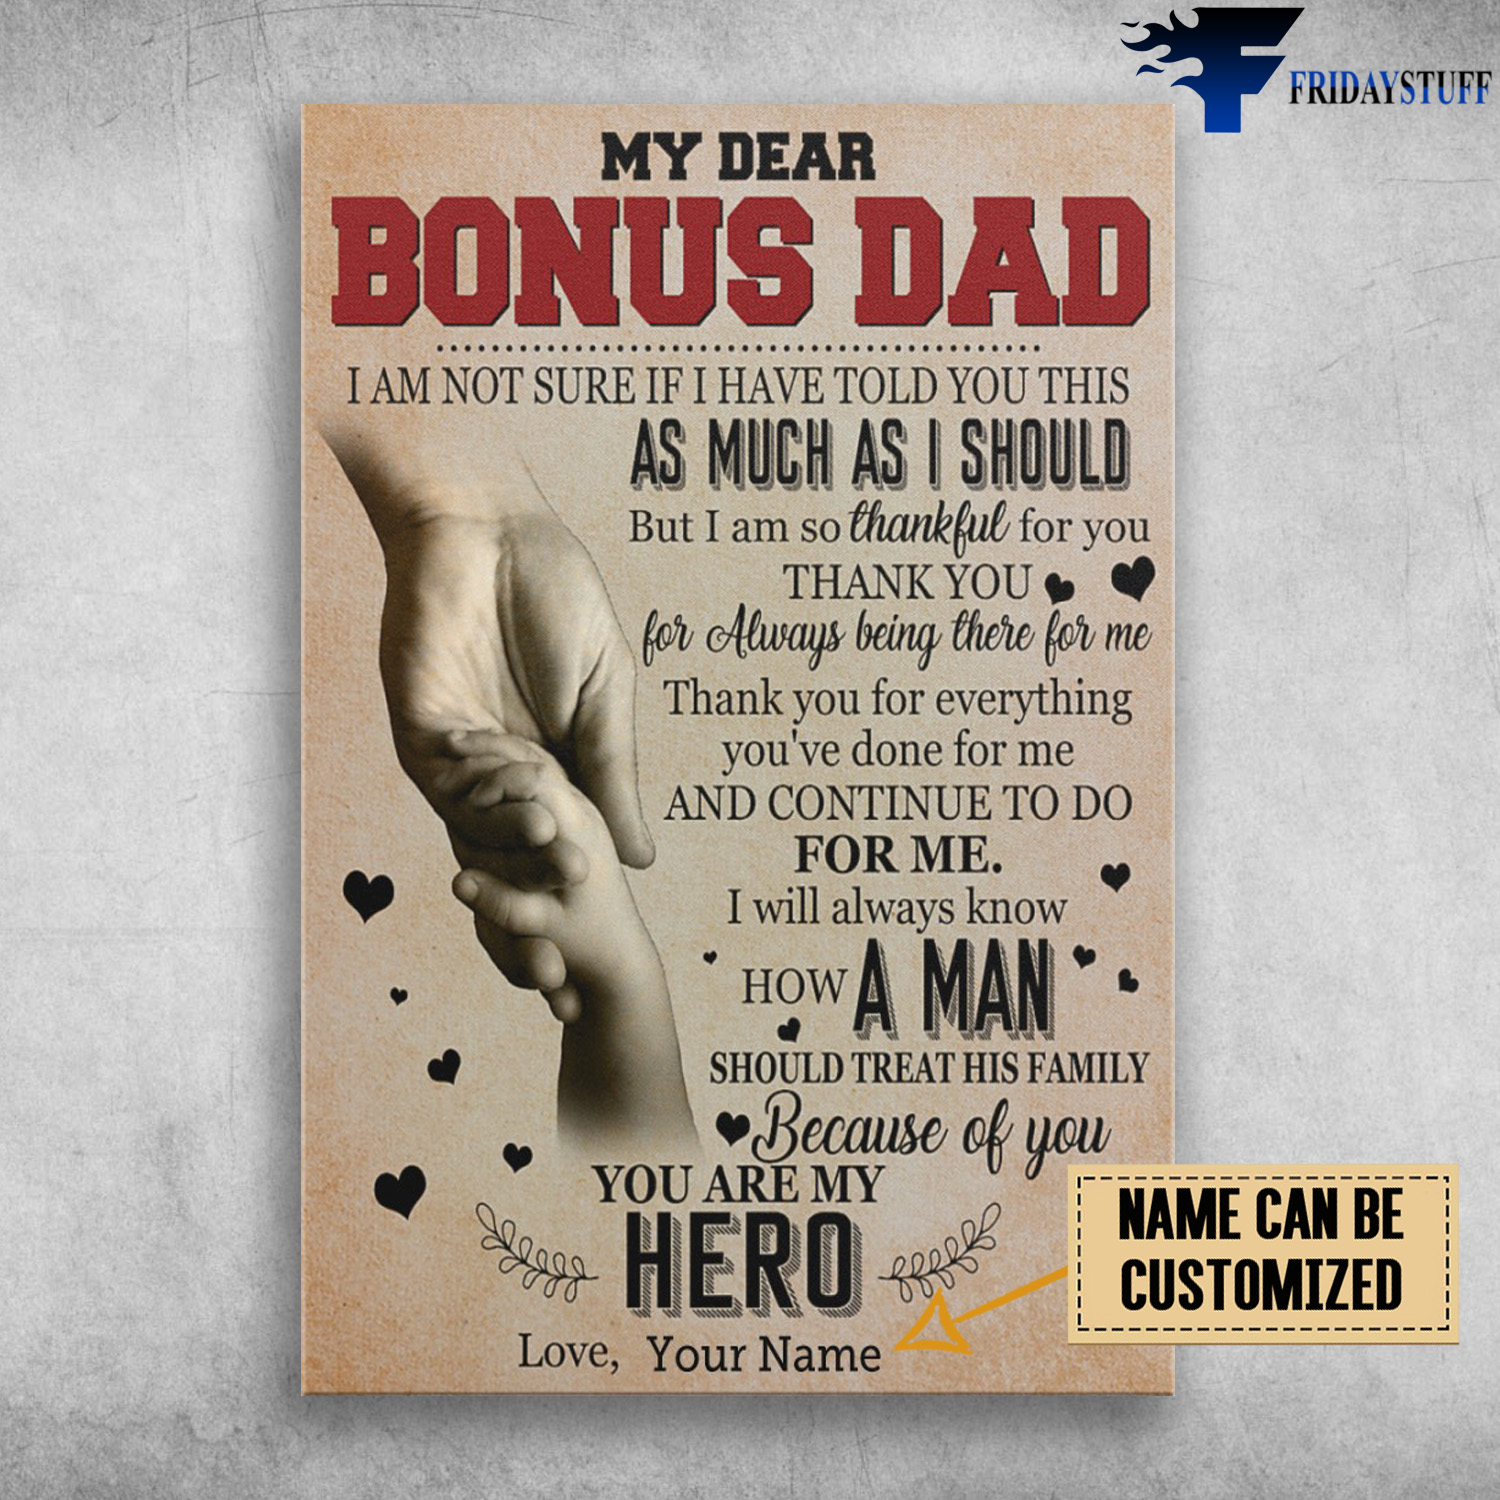 Dad Hand, My Dear Bonus Dad, I Am Not Sure If I Have Told You This, As Much As I Should, But I Am So Thankful For You, Thank You, For Always Being There For Me, Thank You For Everything, You've Done For Me, And Continue To Do For Me, You Are My Hero